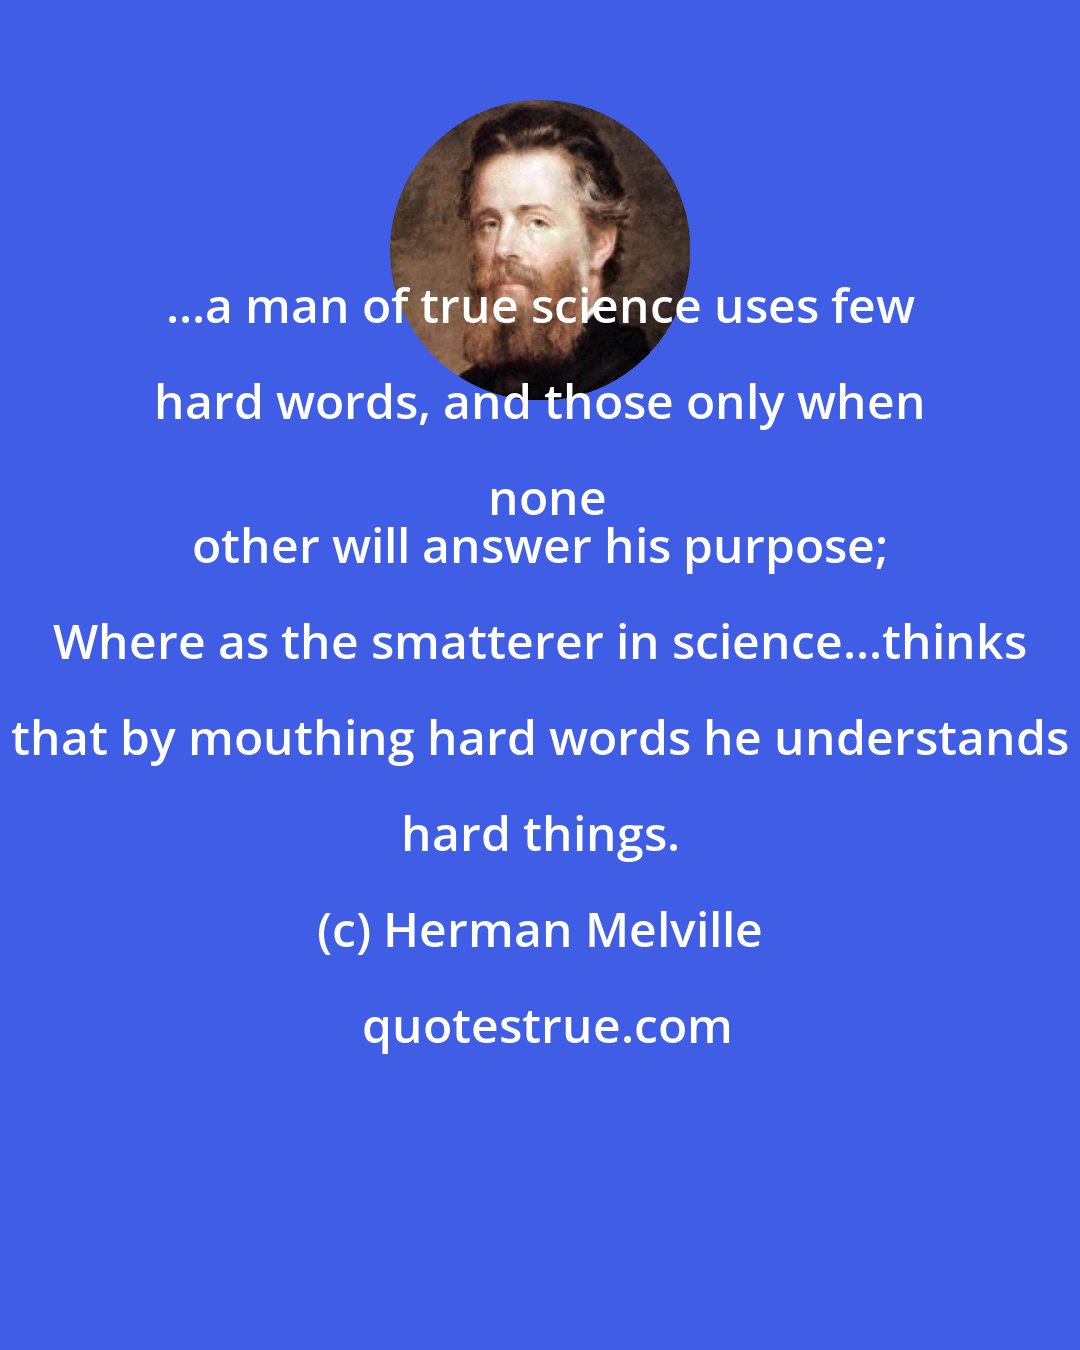 Herman Melville: ...a man of true science uses few hard words, and those only when none
 other will answer his purpose; Where as the smatterer in science...thinks that by mouthing hard words he understands hard things.